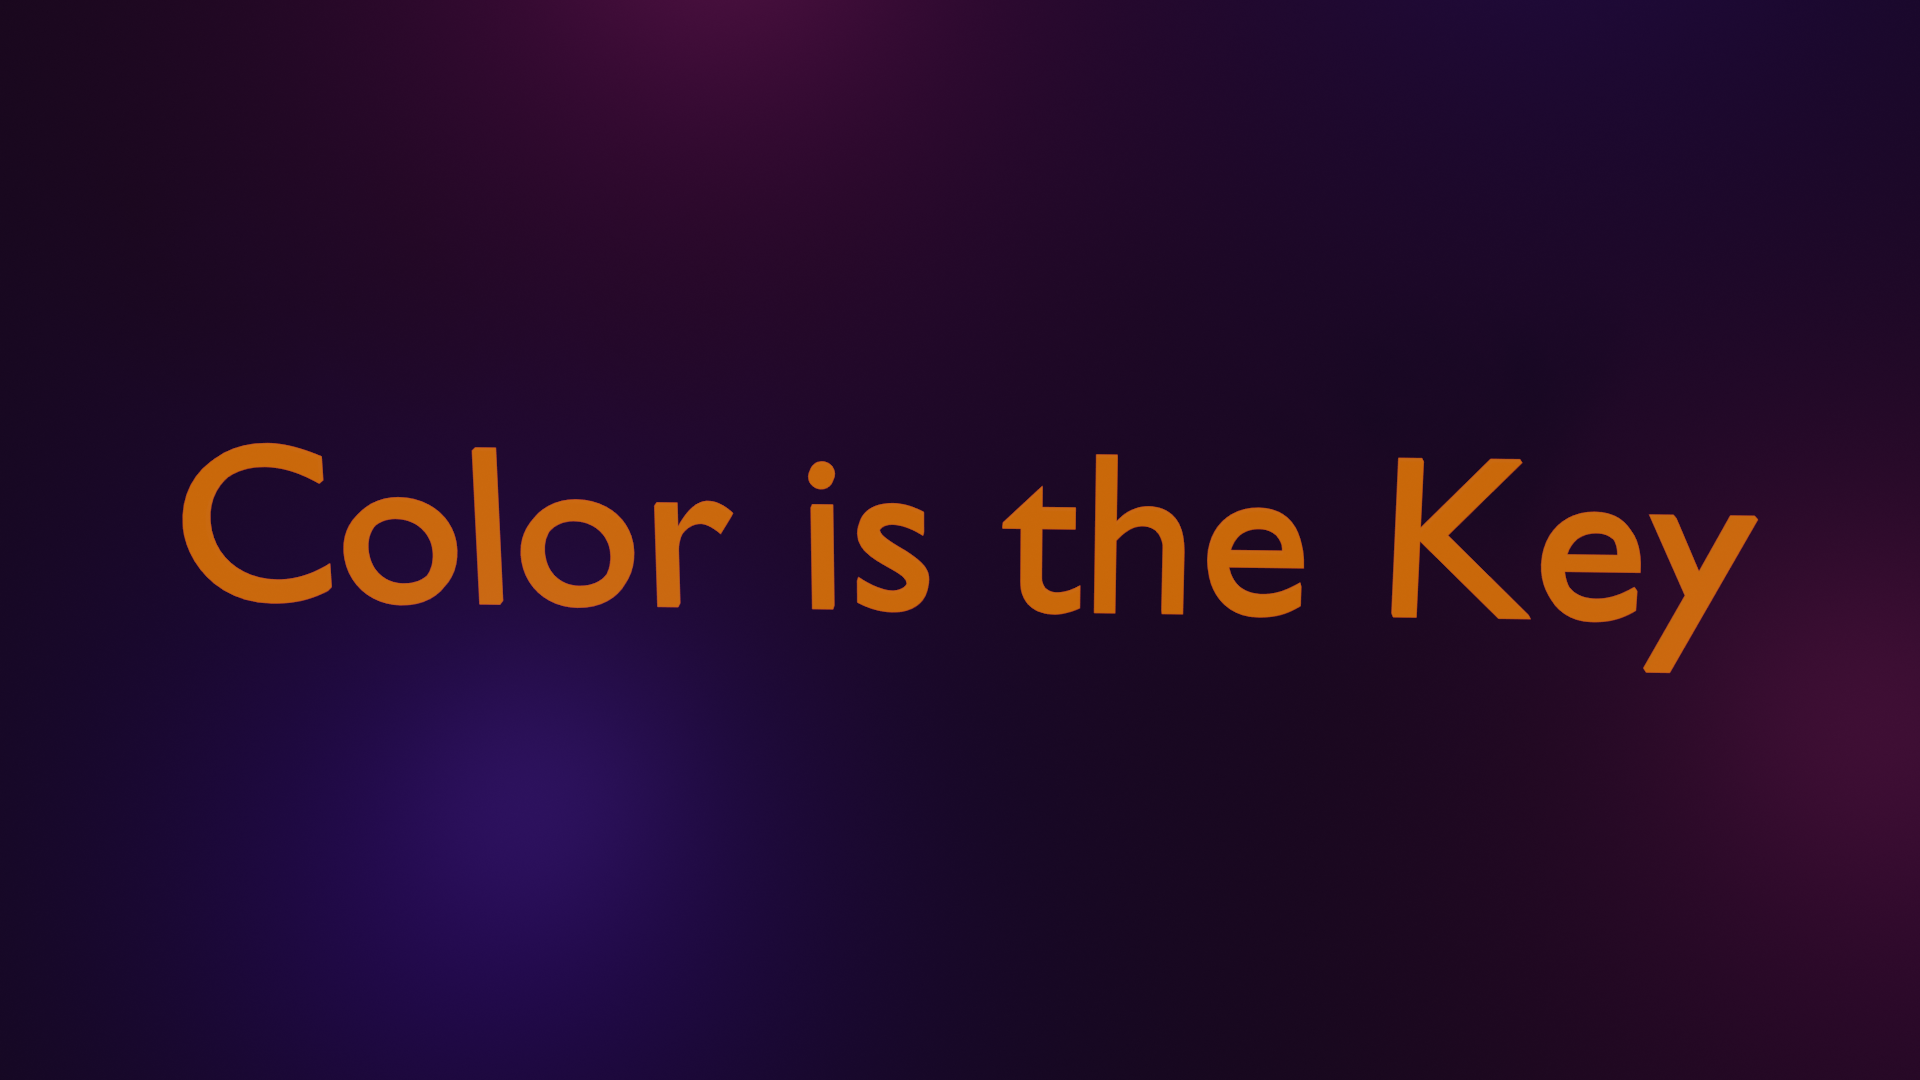 Color is the Key